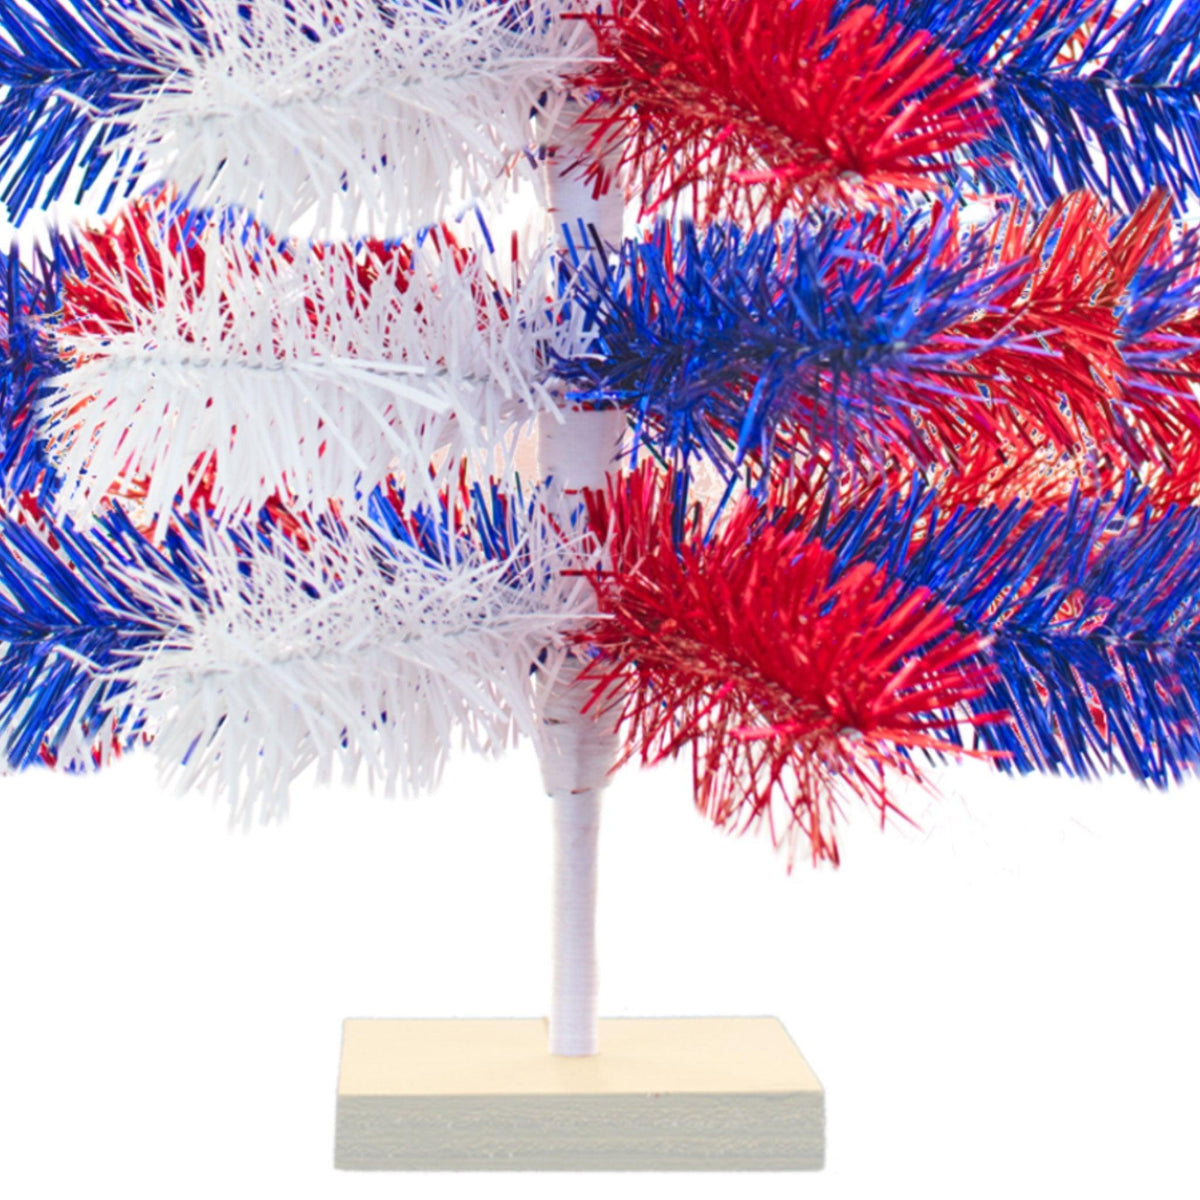 24in Tall Red White and Blue Mixed Tinsel Christmas Tree on sale at leedisplay.com.  2FT trees come with White flat tree stands.